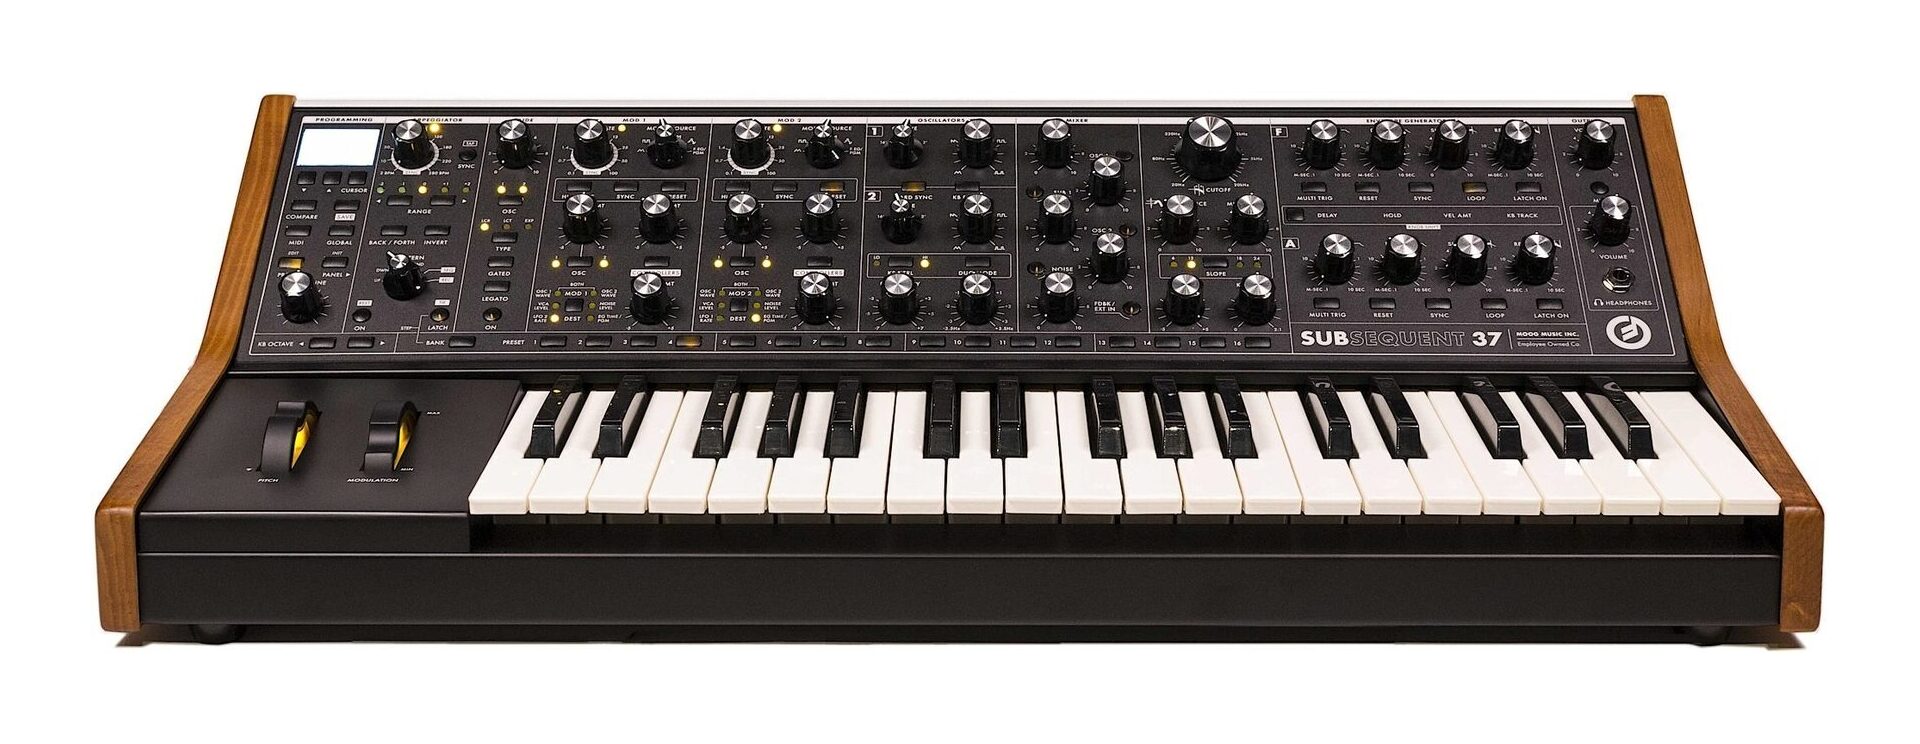 moog Subsequent 37 パラフォニック・アナログ・シンセサイザー モーグ